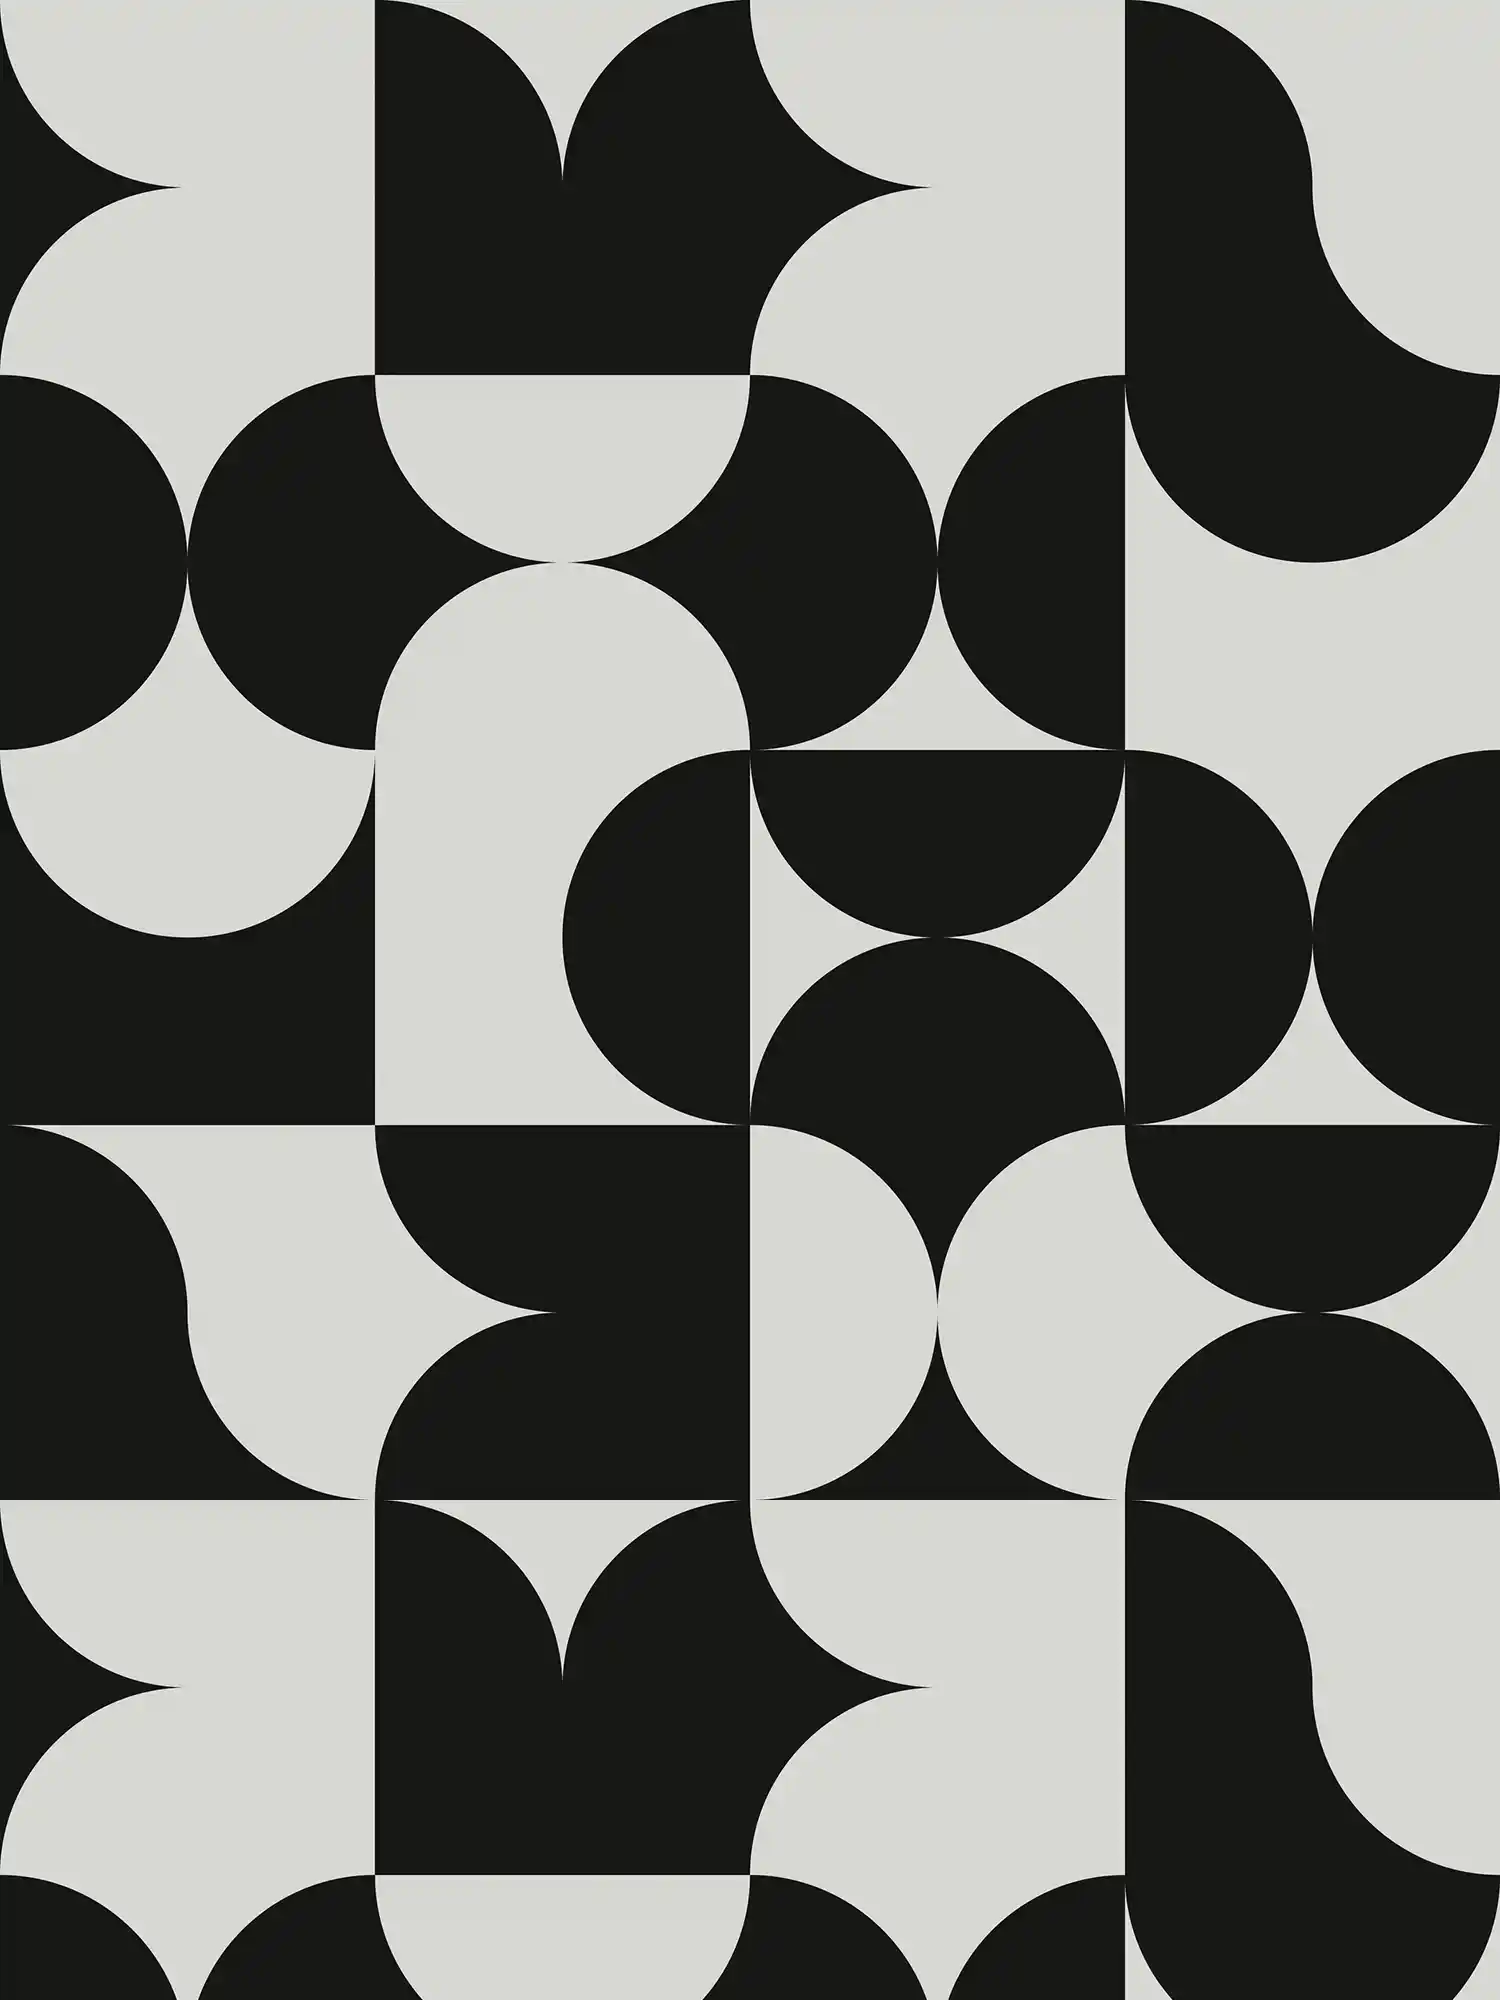 70s style retro wallpaper with graphic pattern - black and white
